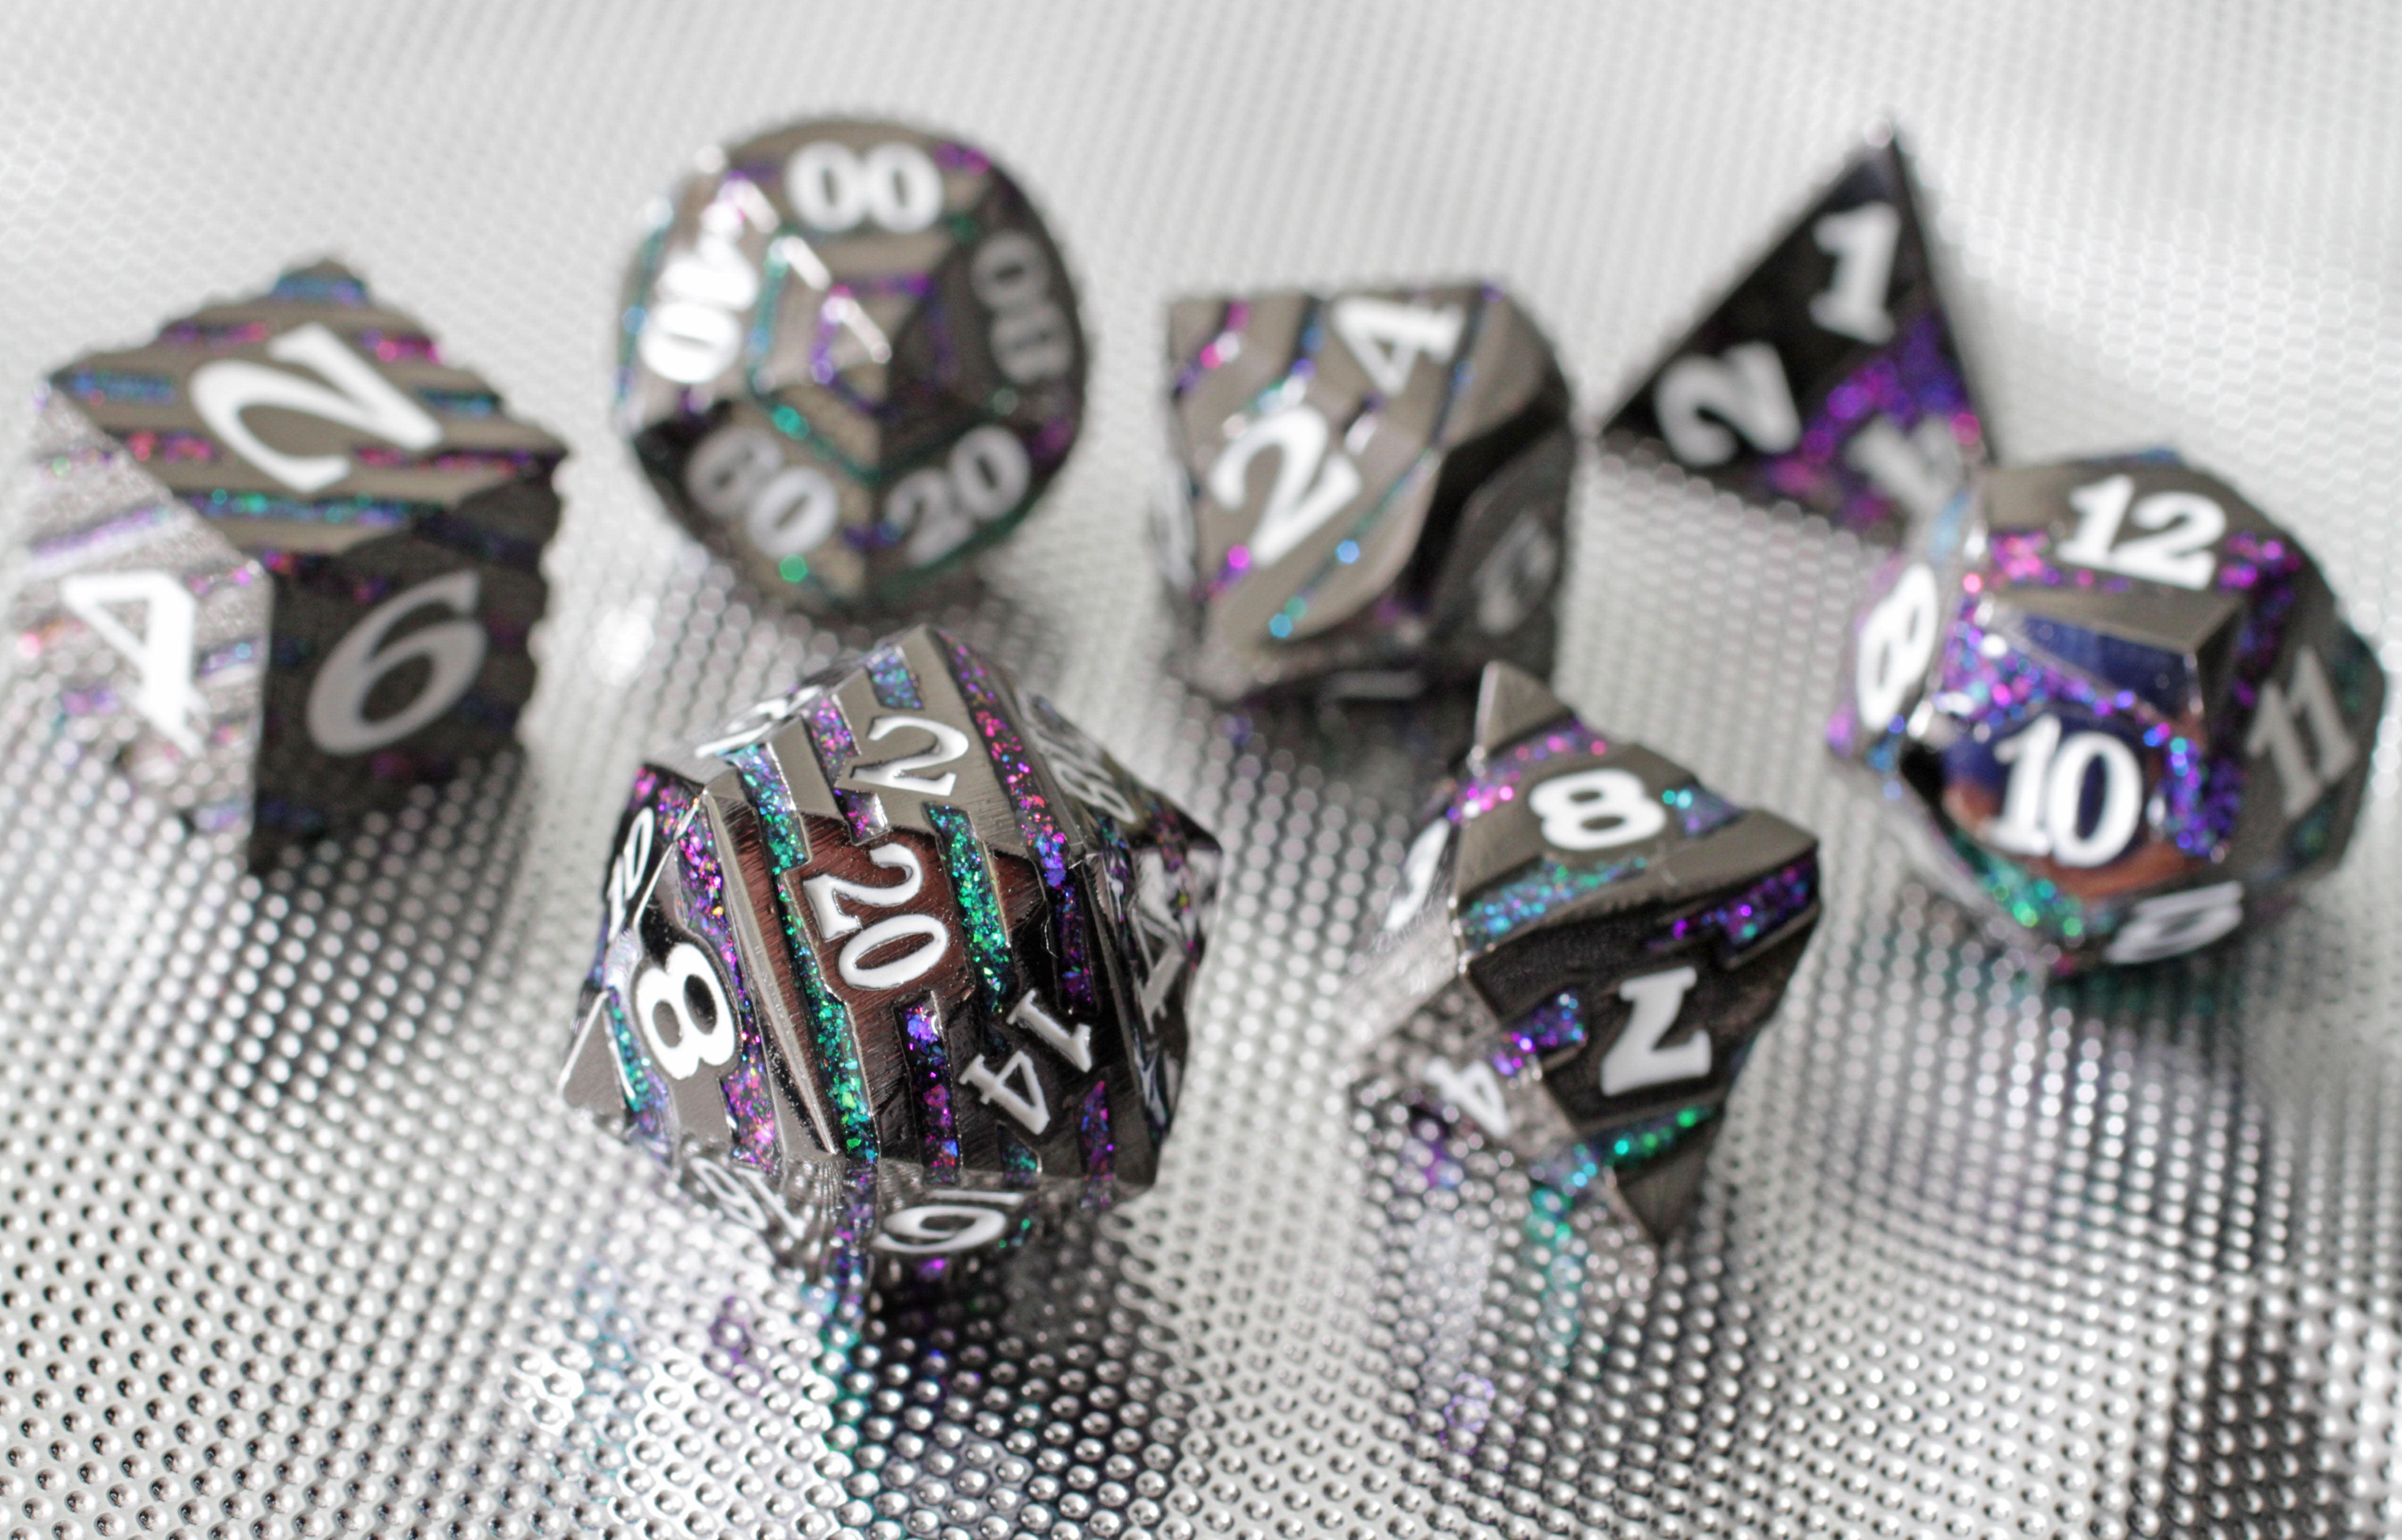 10 Things to Consider When Buying Metal Dice